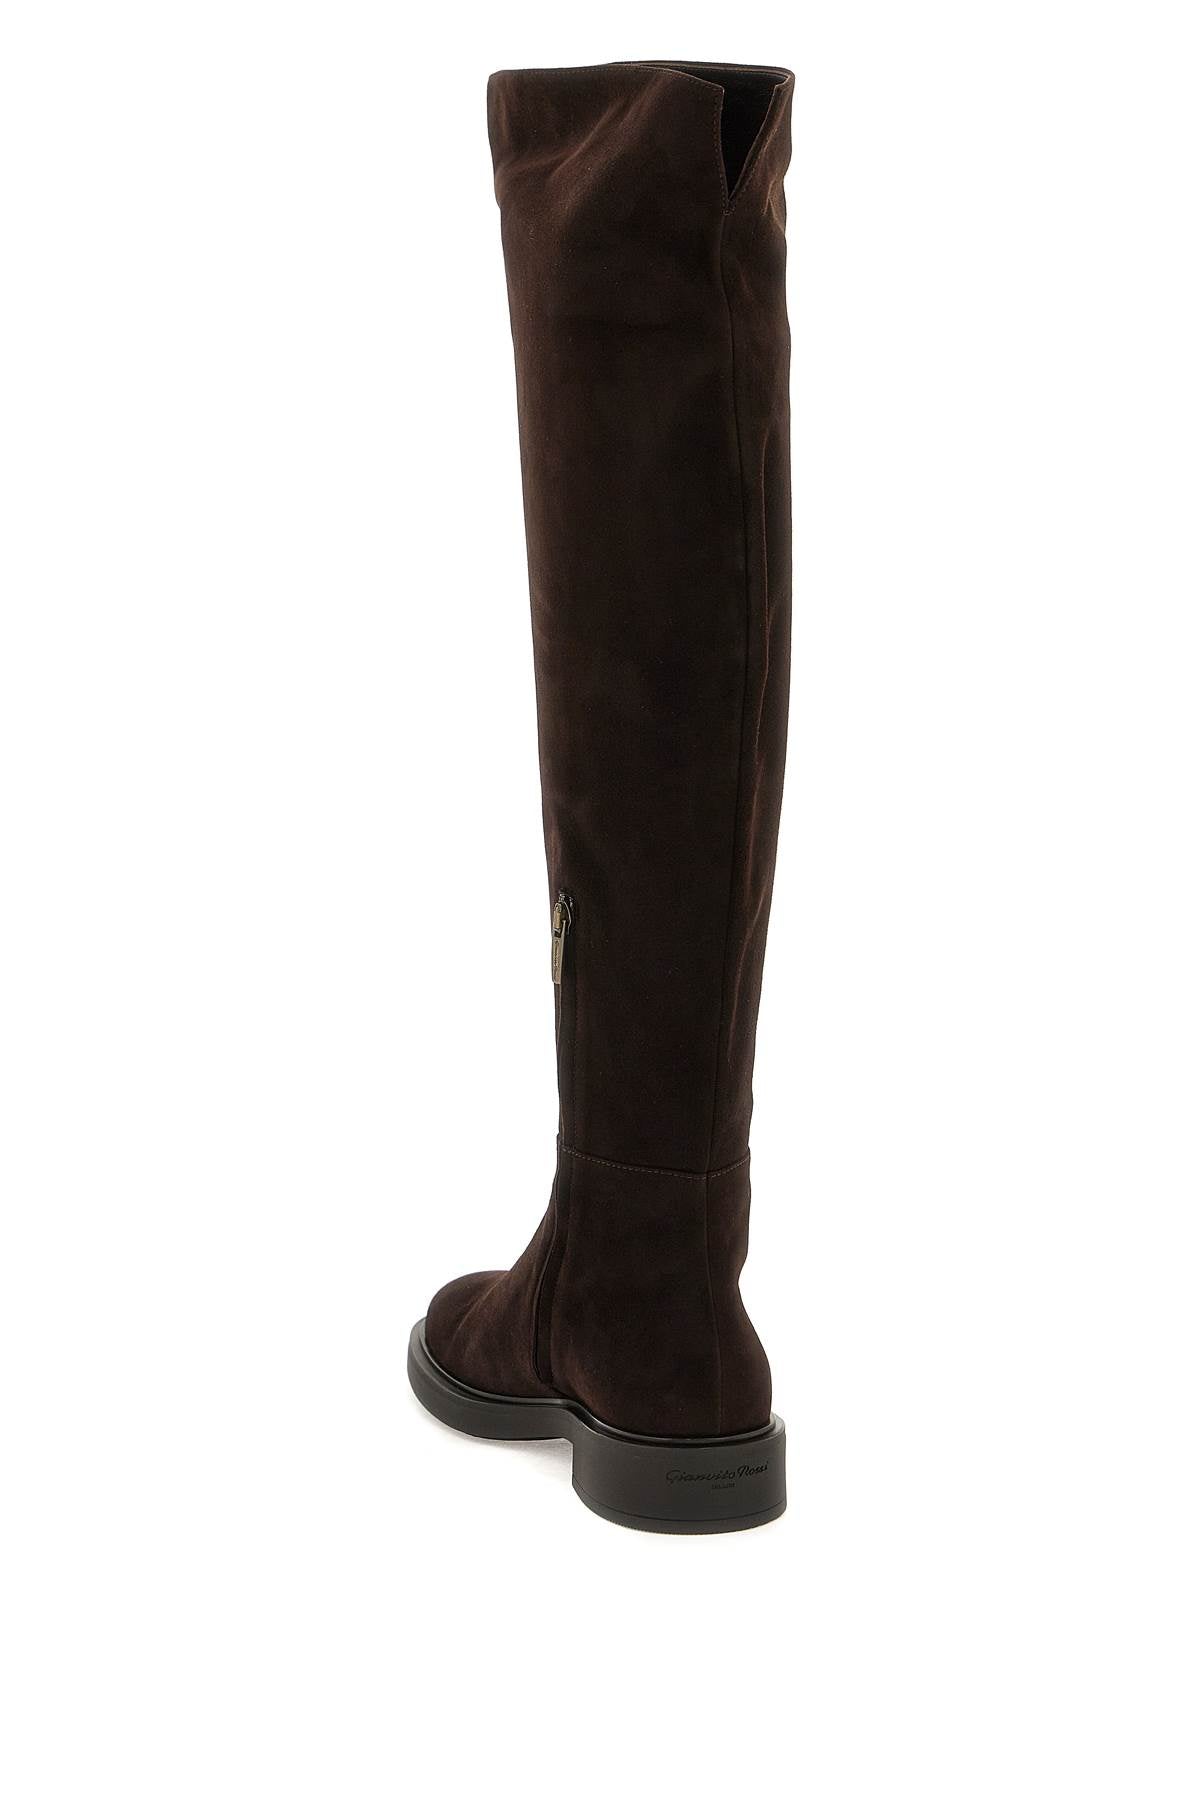 GIANVITO ROSSI Brown Suede Leather Lexington Boots for Women